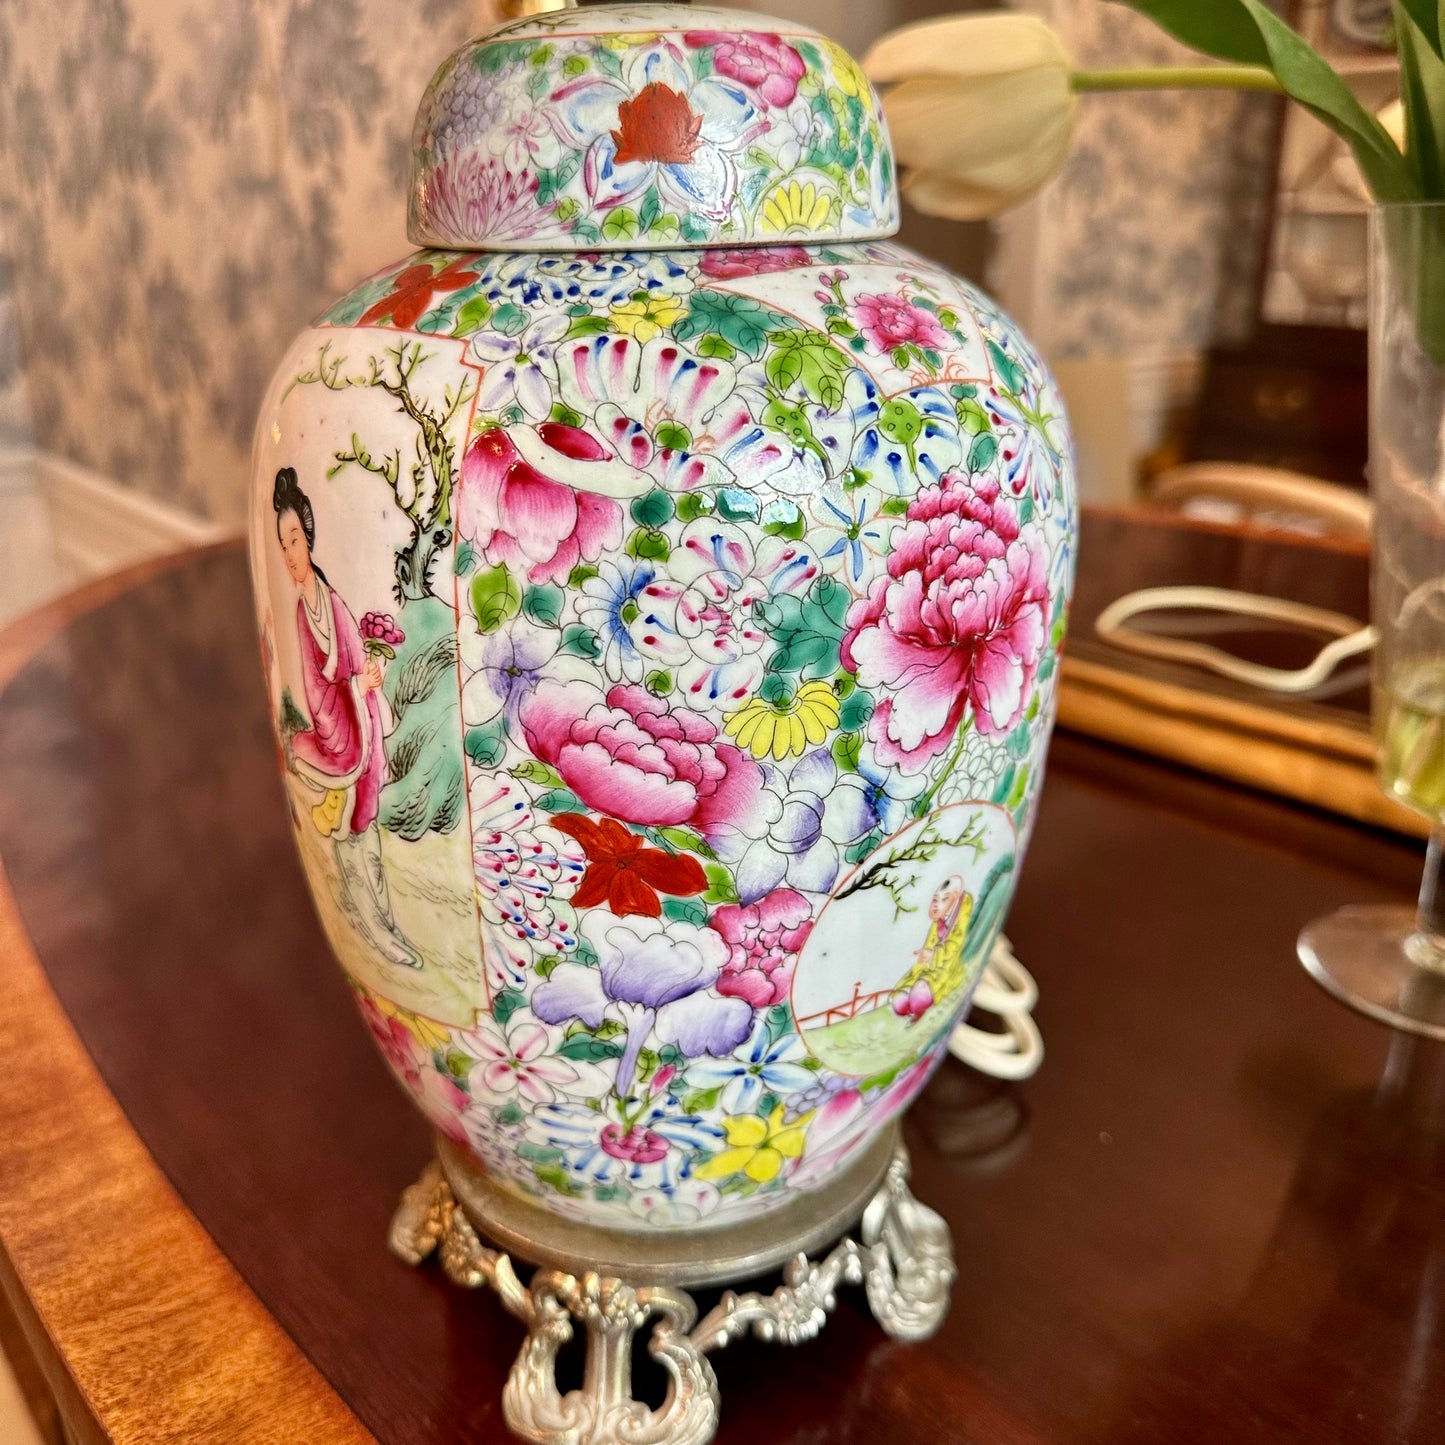 Fabulous Pair of Vintage Chinese Colorful Ginger Jar Lamps